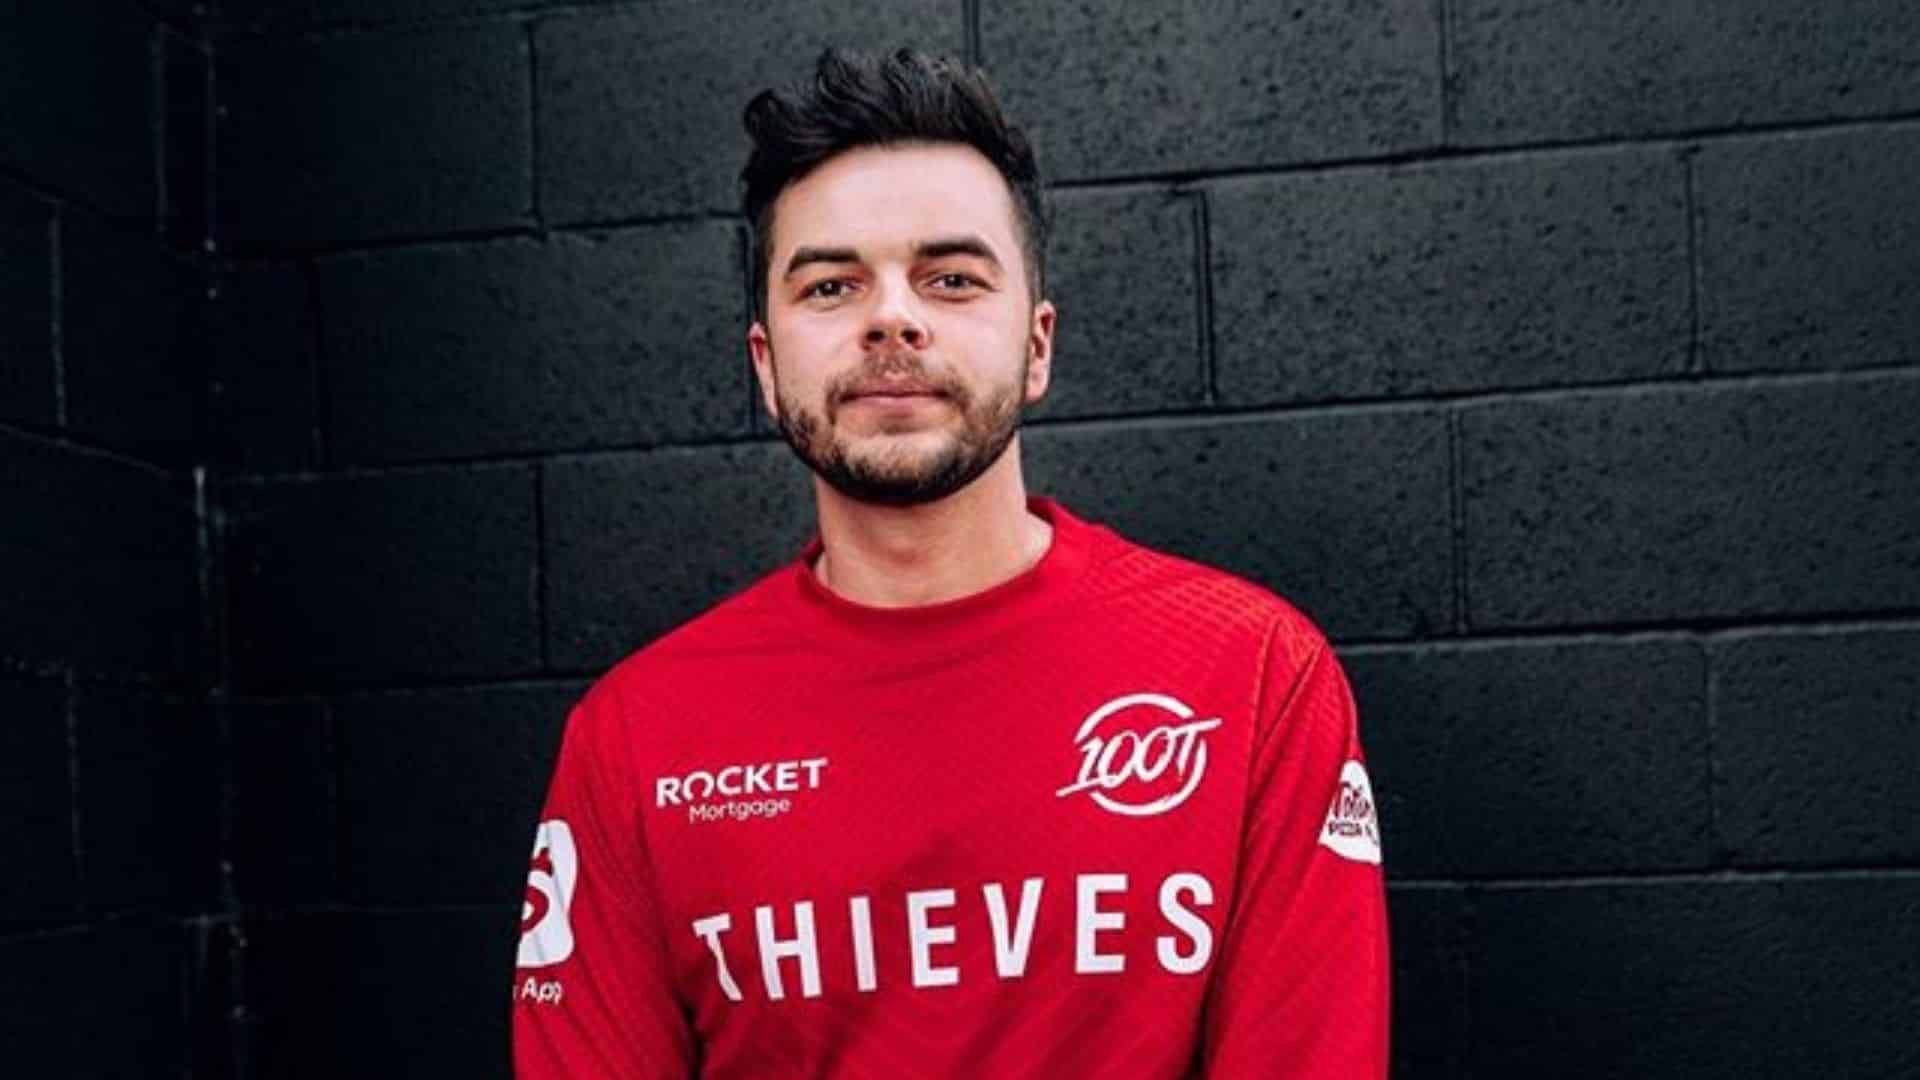 Nadeshot in red 100 Thieves jersey